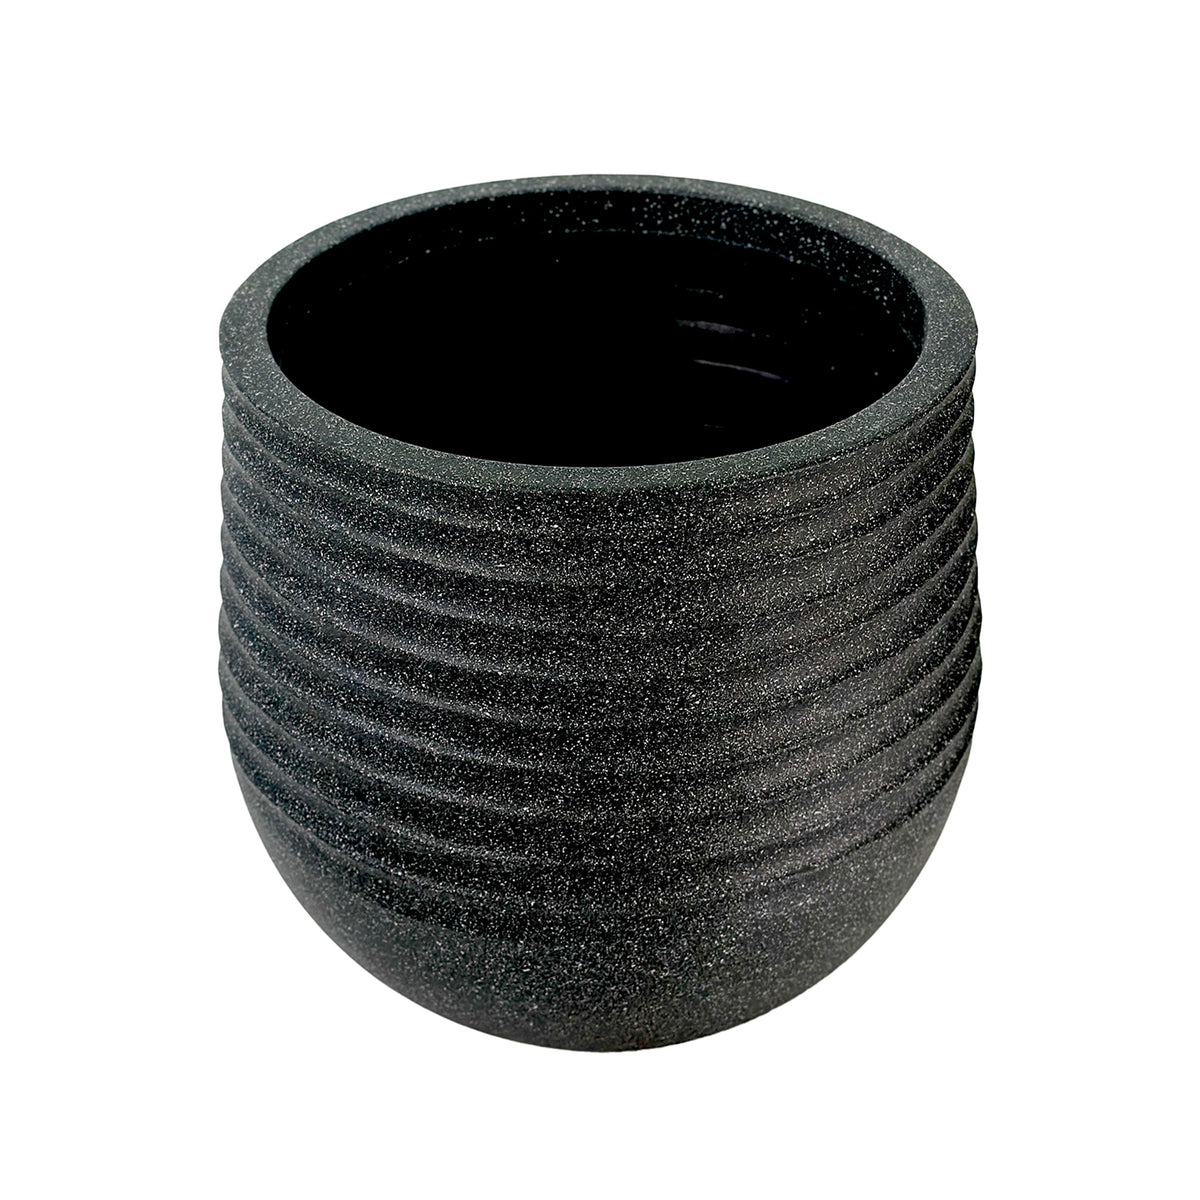 53 cm Poly-resin, Large Ribbed planter, Mediterranean Black with a terrazzo finish, Lightweight, Weather resistant and eco friendly, Front view.